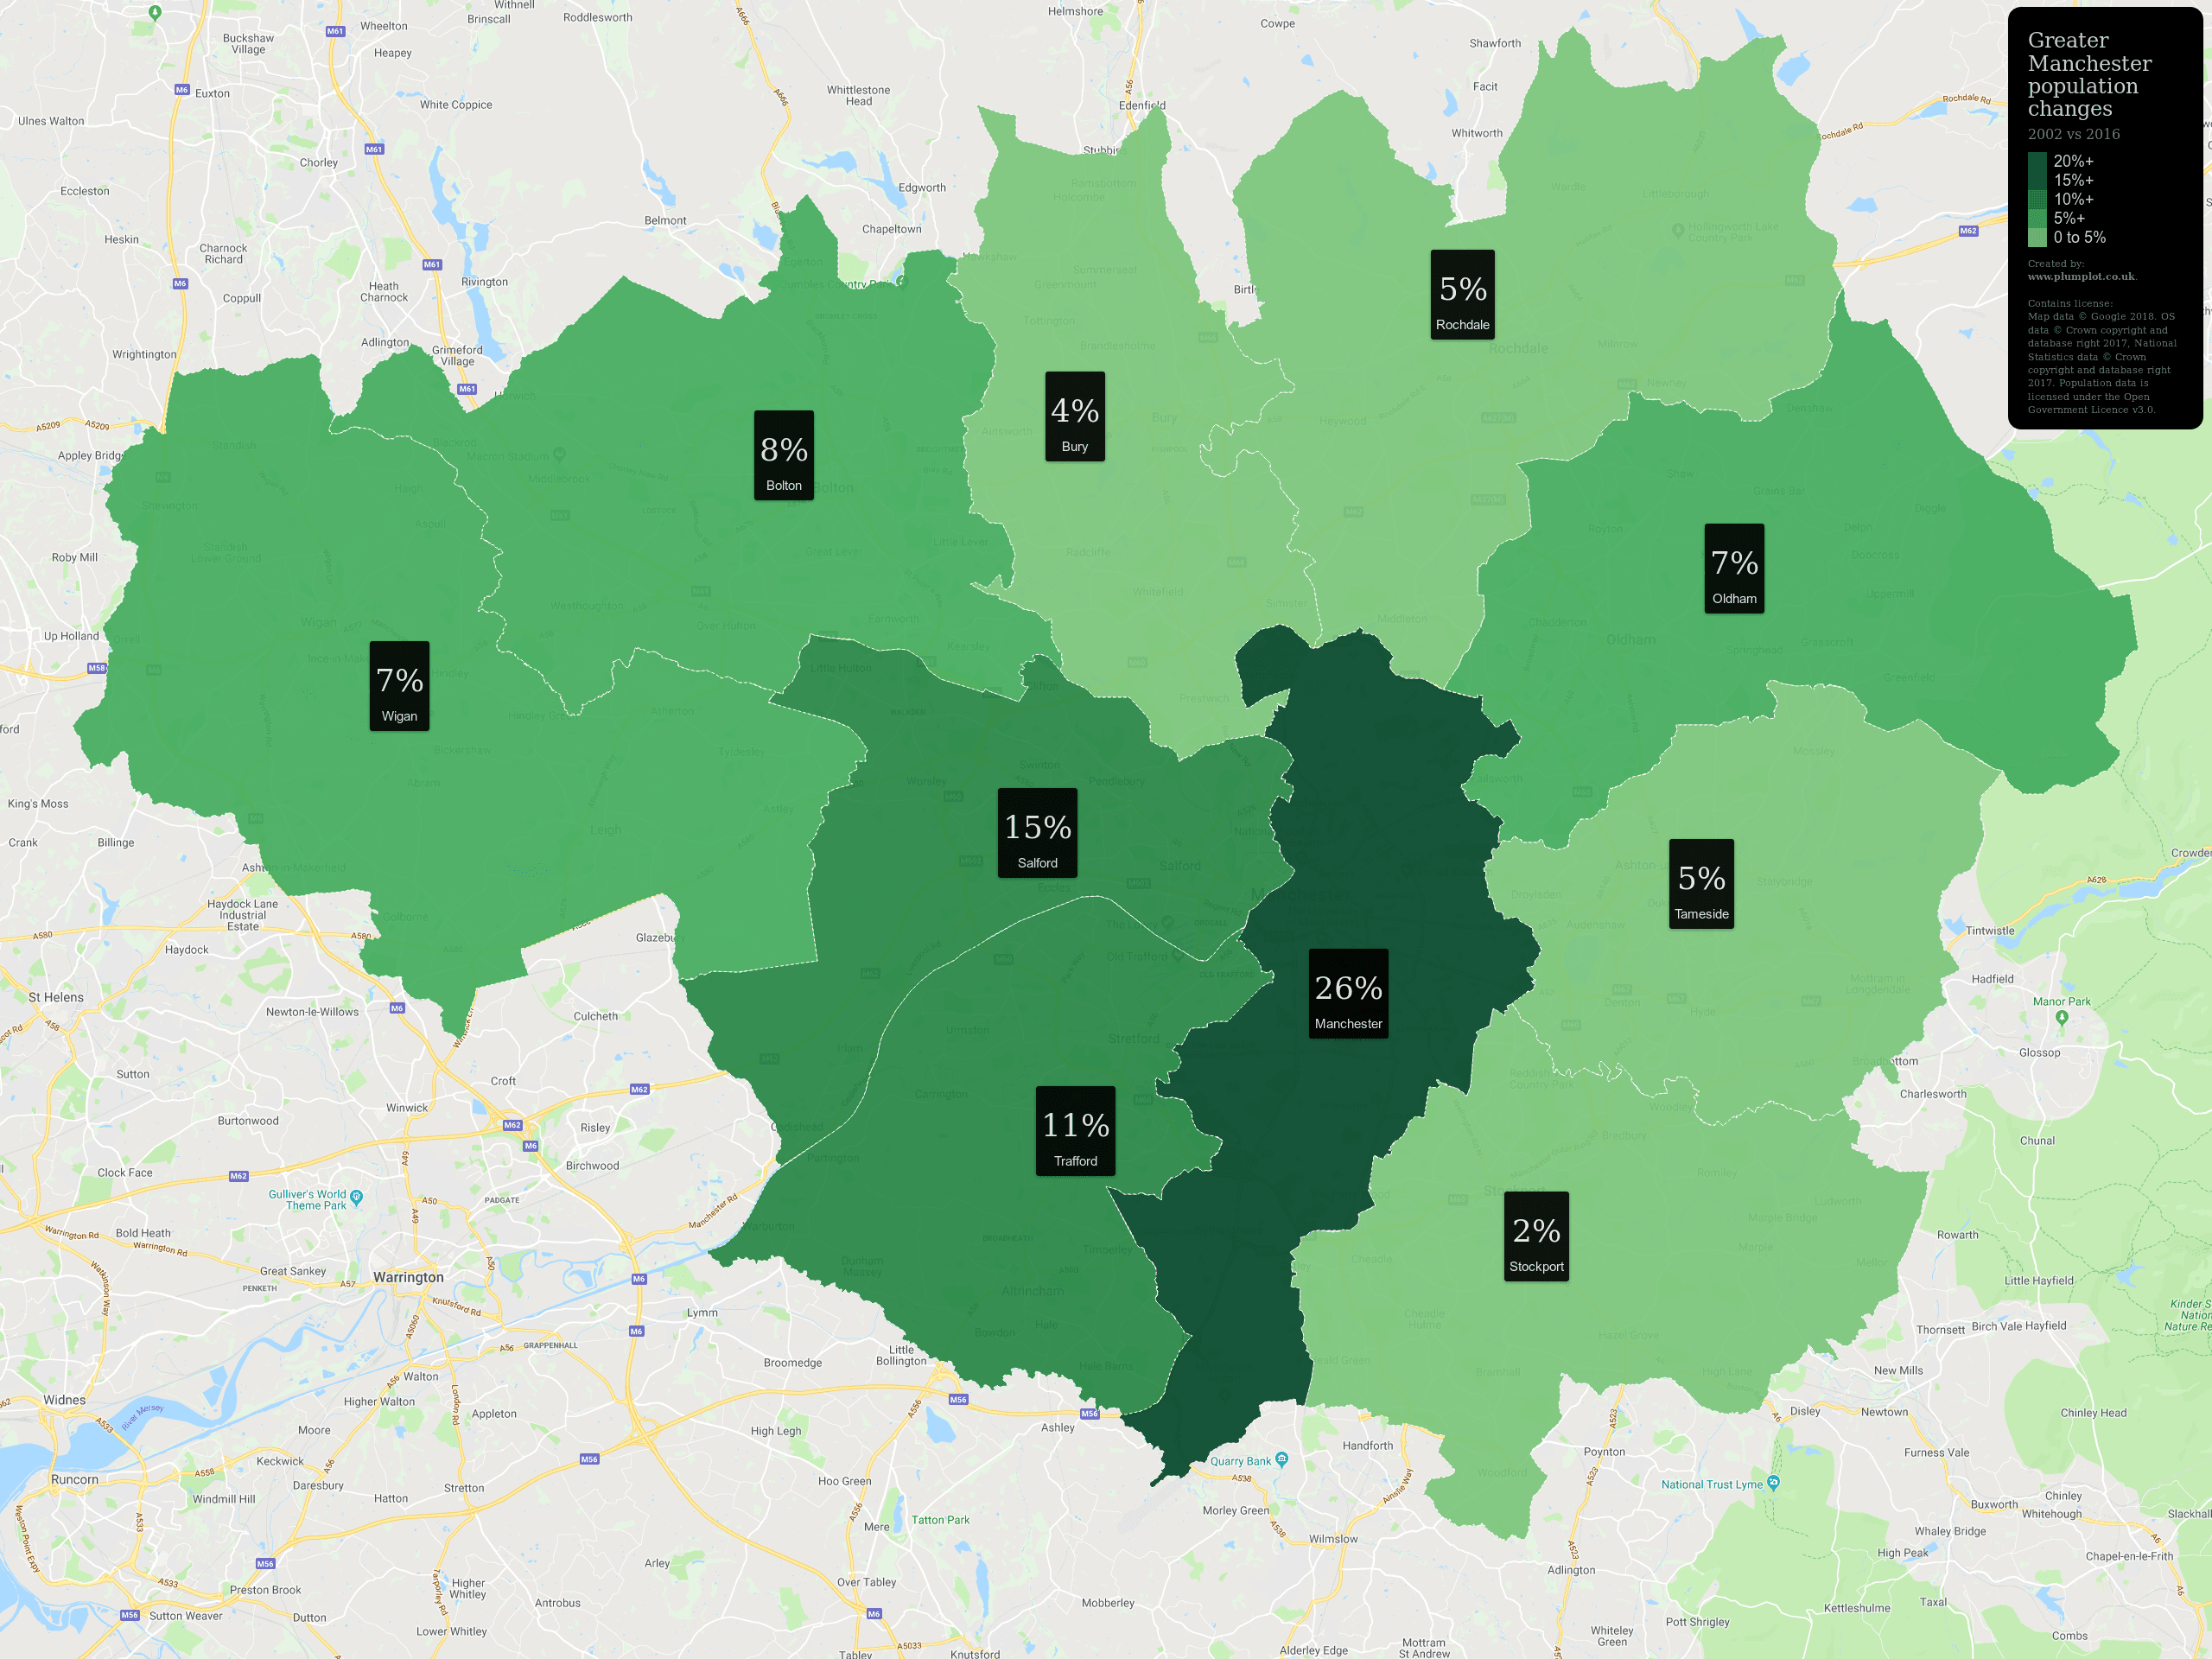 Greater manchester population changes by local authority